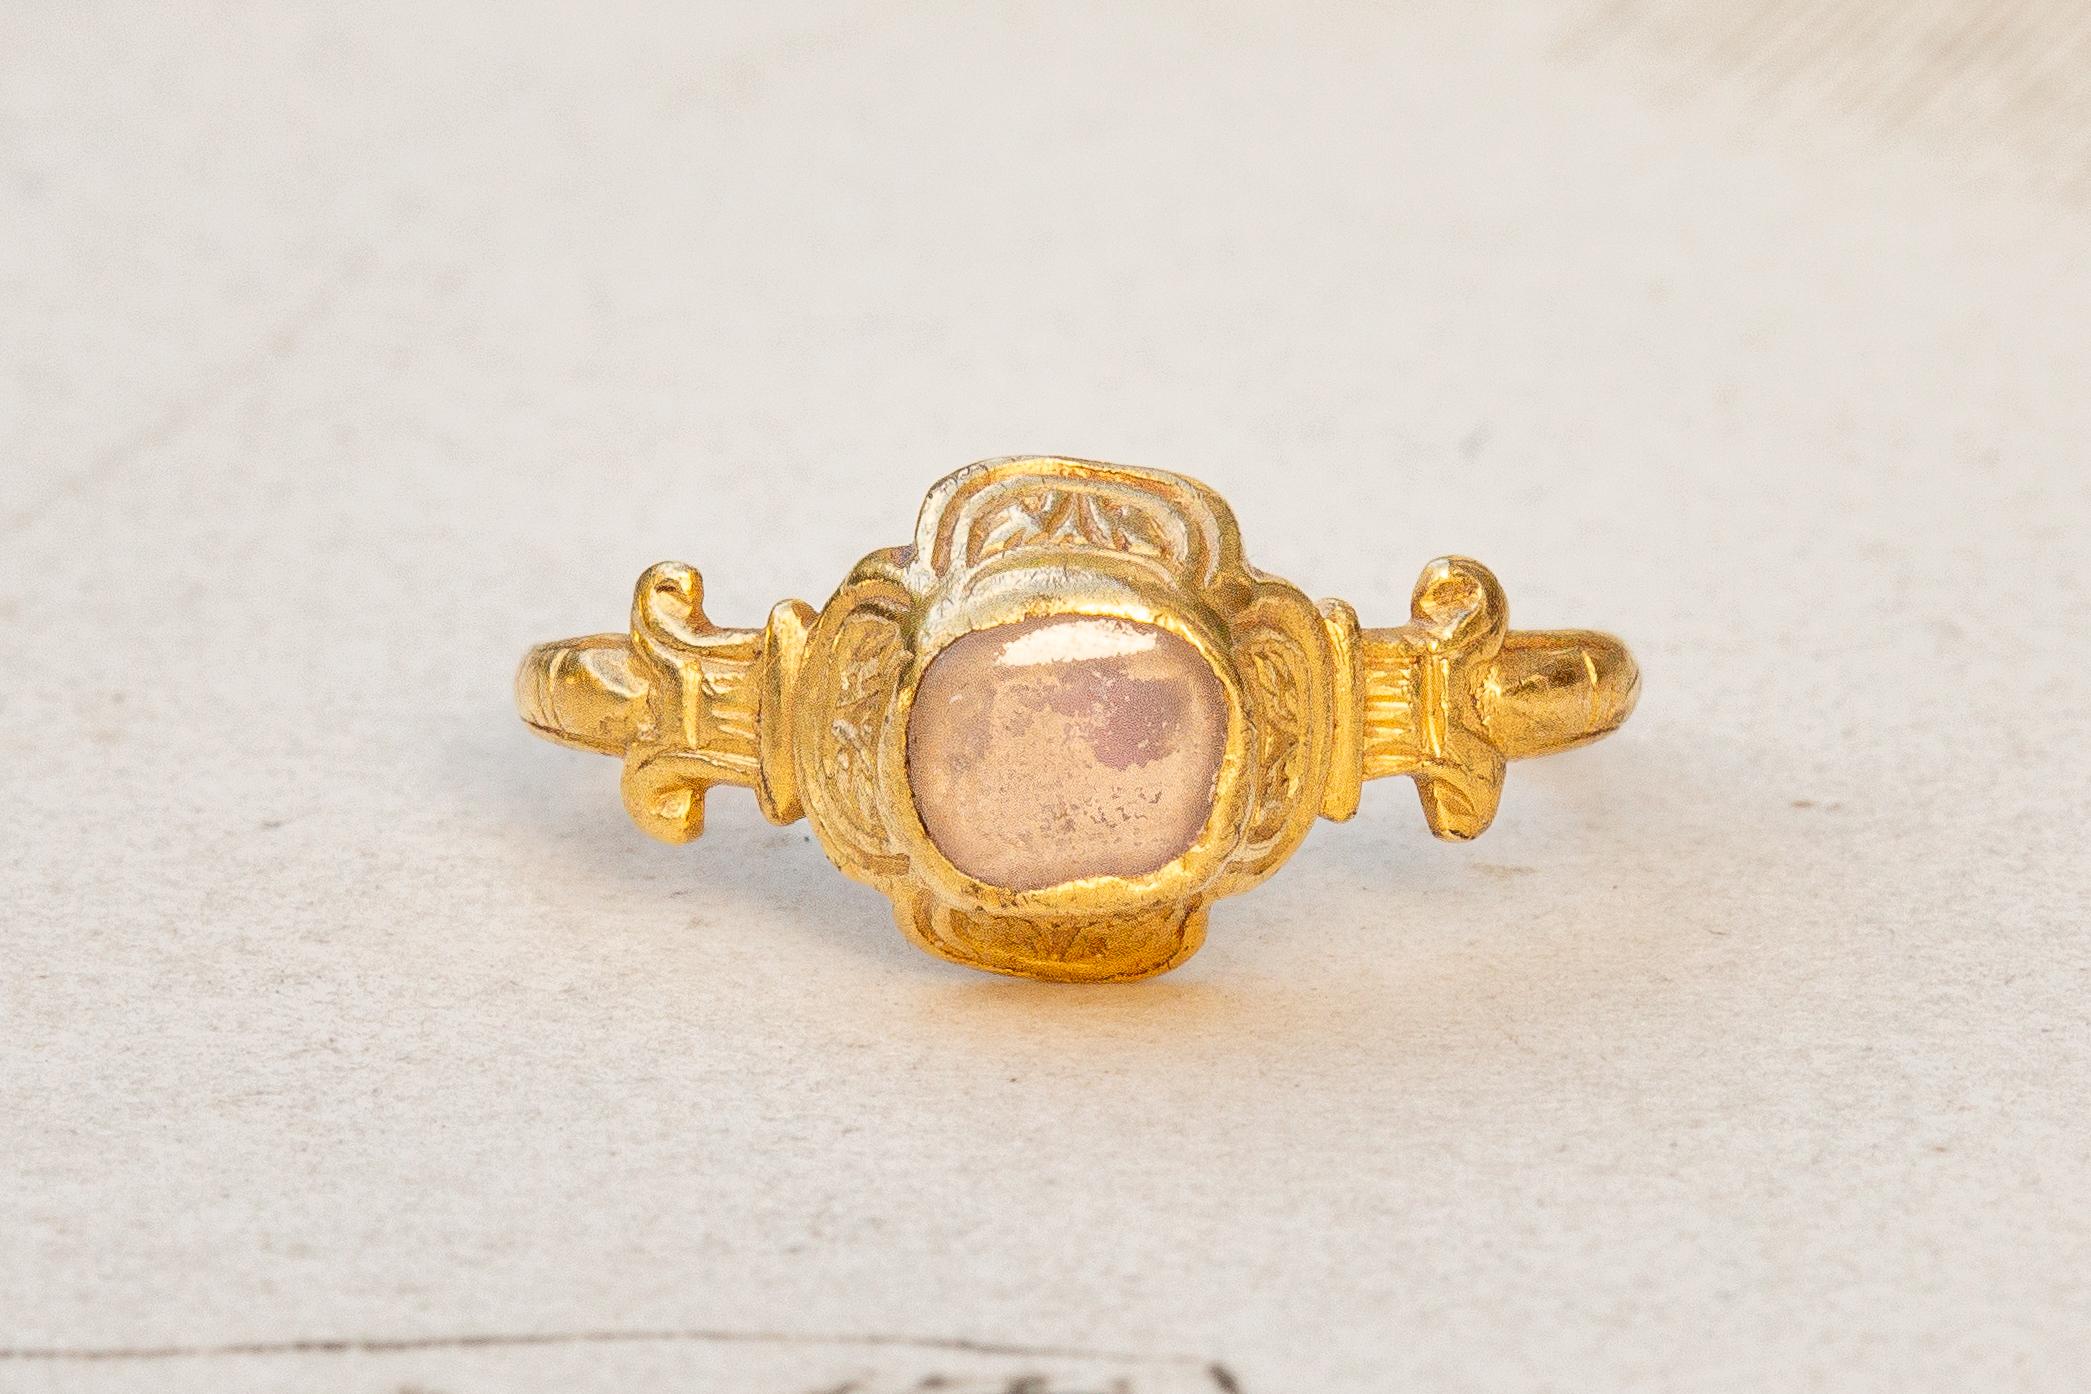 A scarce late Renaissance gold ring, made in Western Europe, circa 1580-1620! 

The quatrefoil bezel takes the form of a flower petals and contains a shallow table-cut rock crystal. The boxed bezel is cuffed on each side and intricately chased with